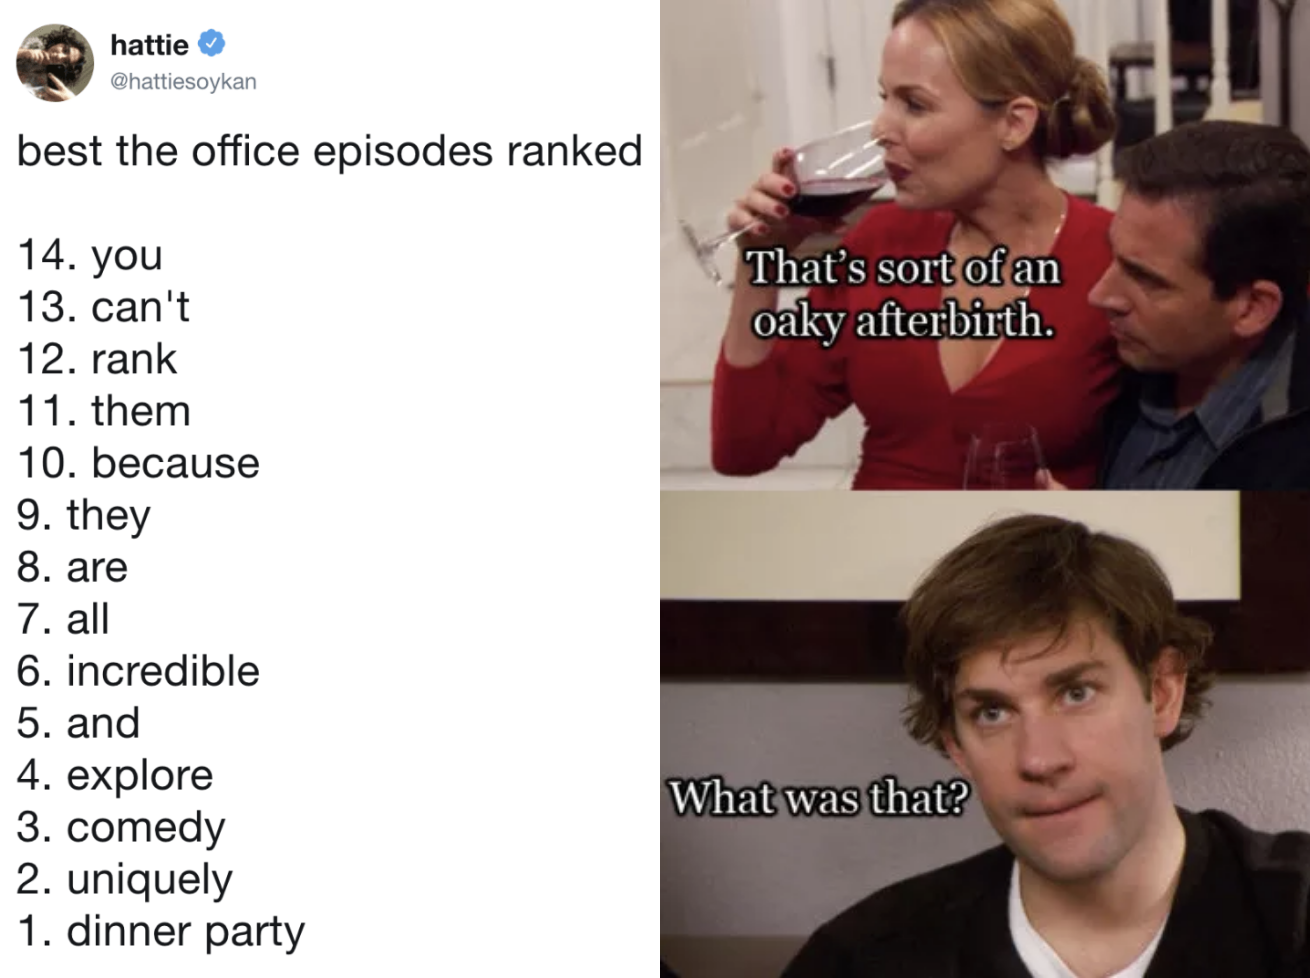 Do You Agree With The Ranking Meme's Best TV Episodes Of All Time?